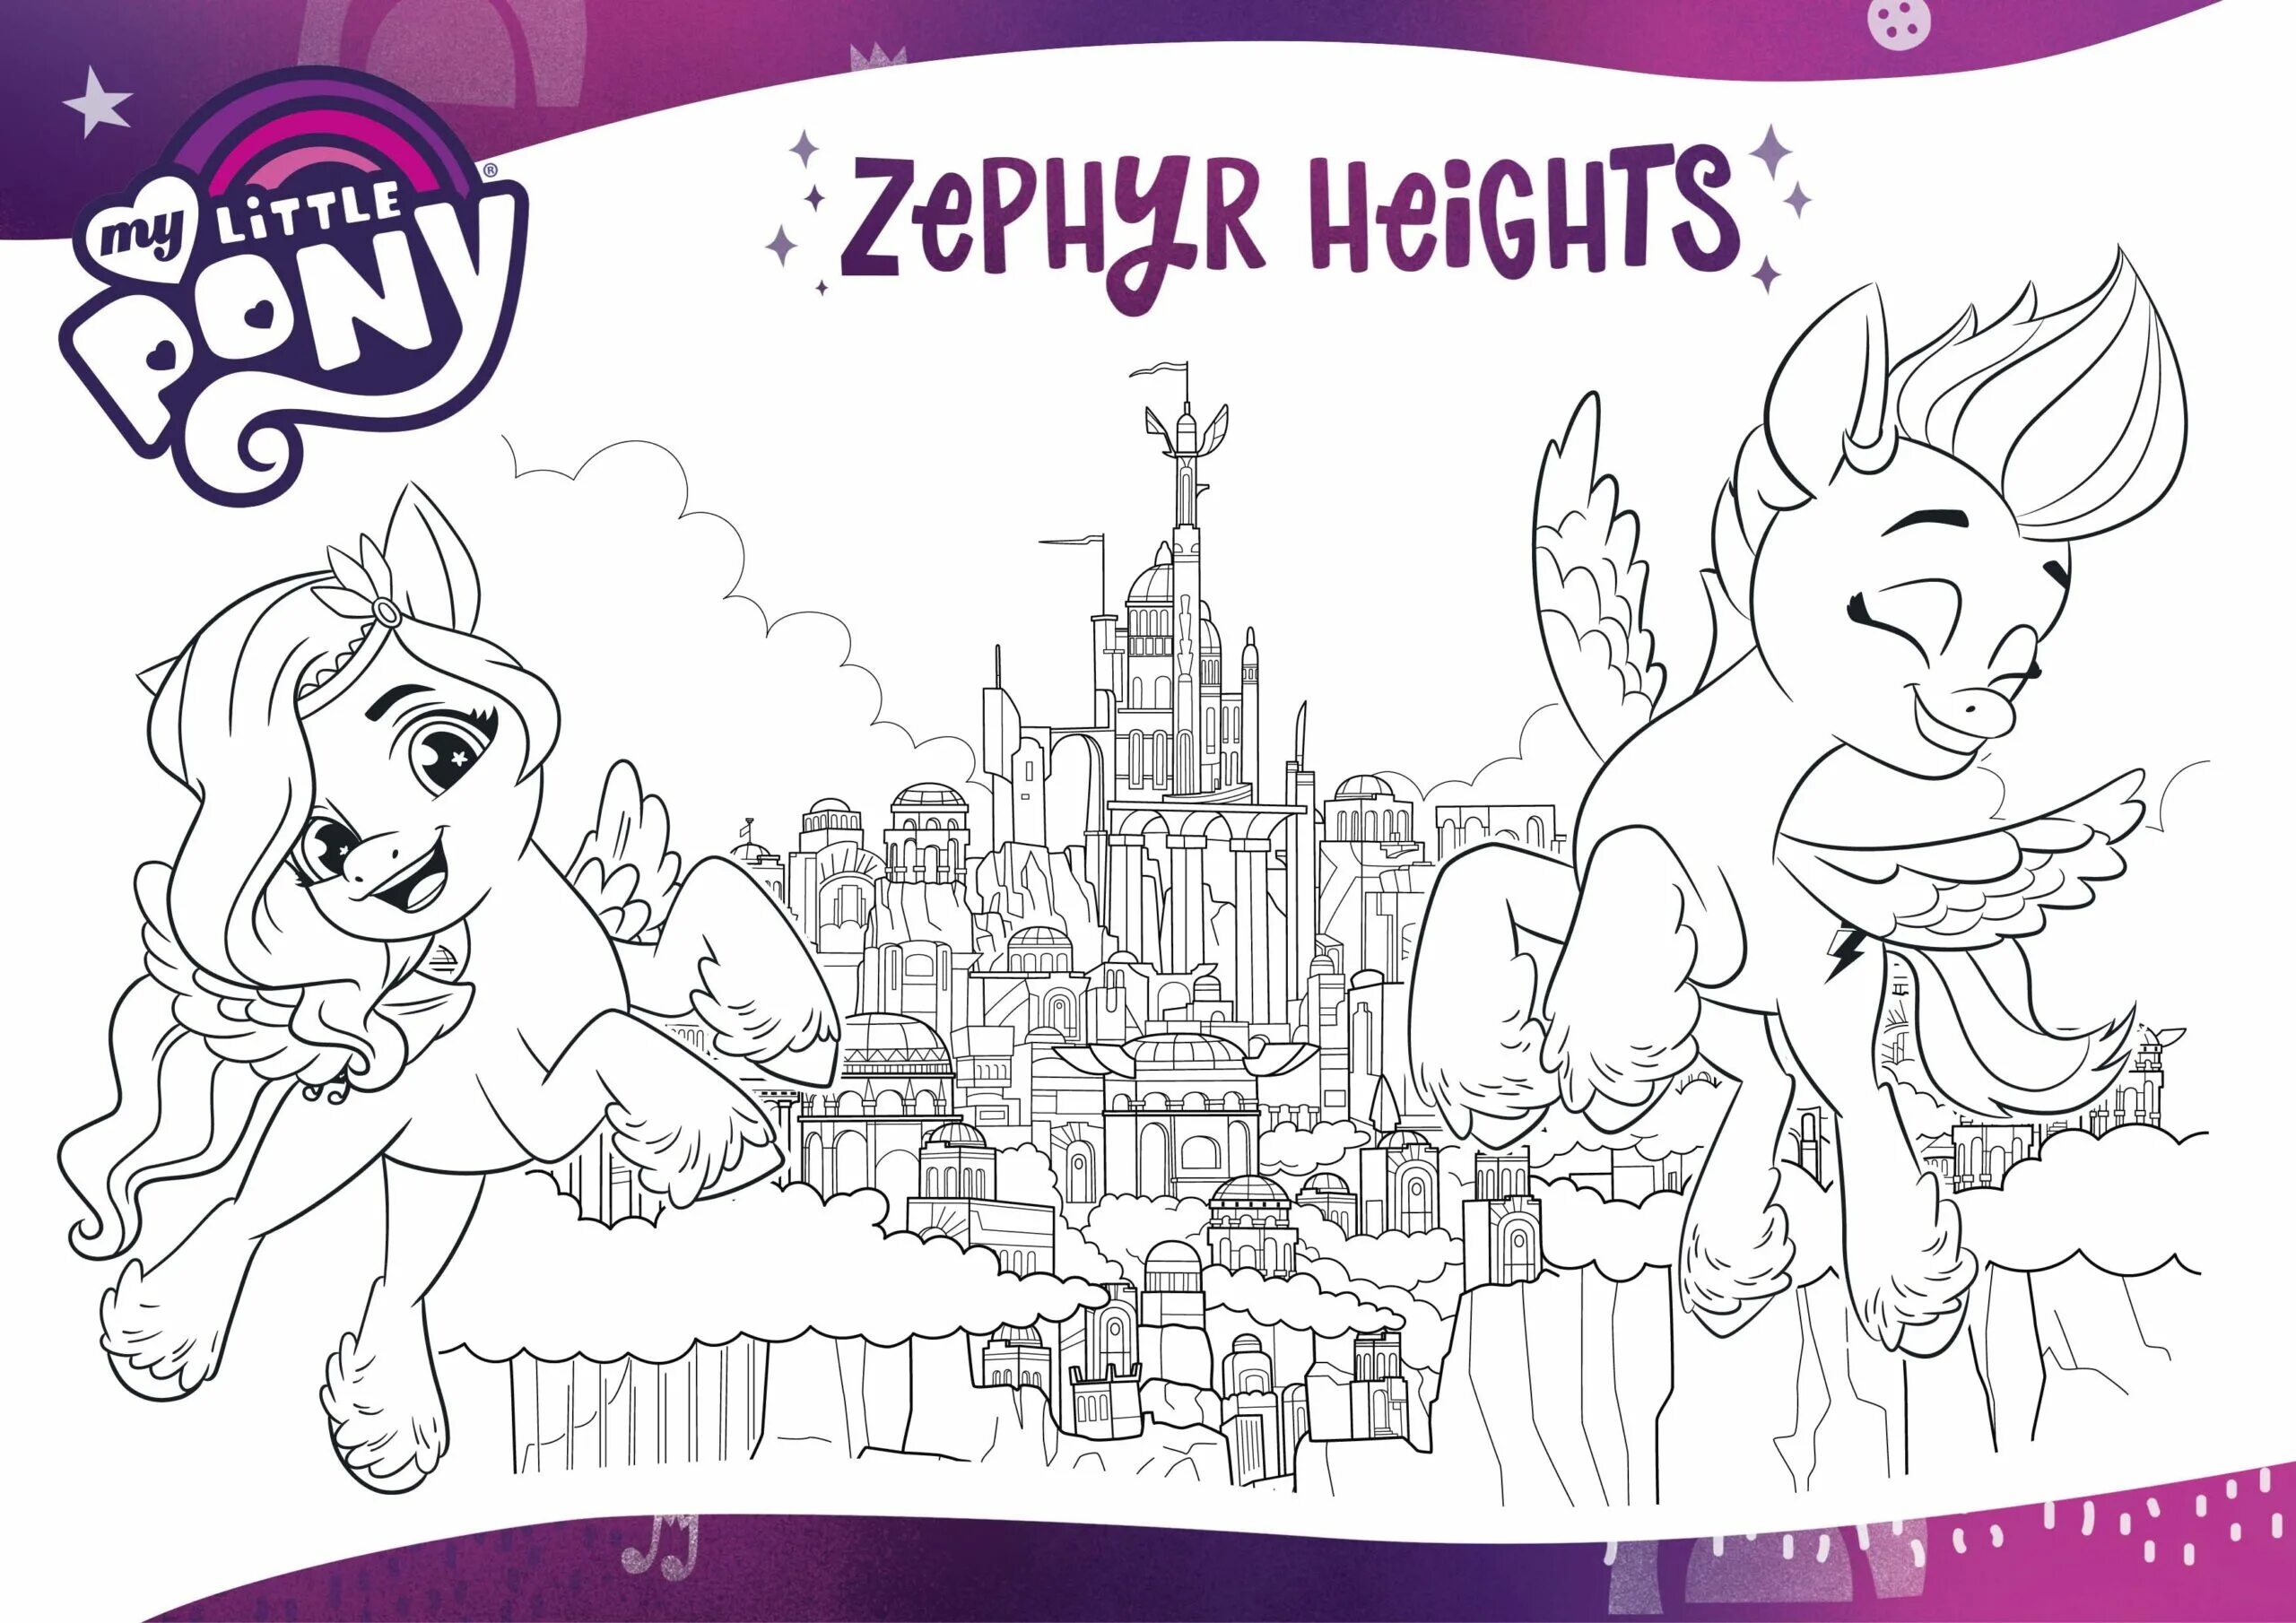 Easy pony coloring book